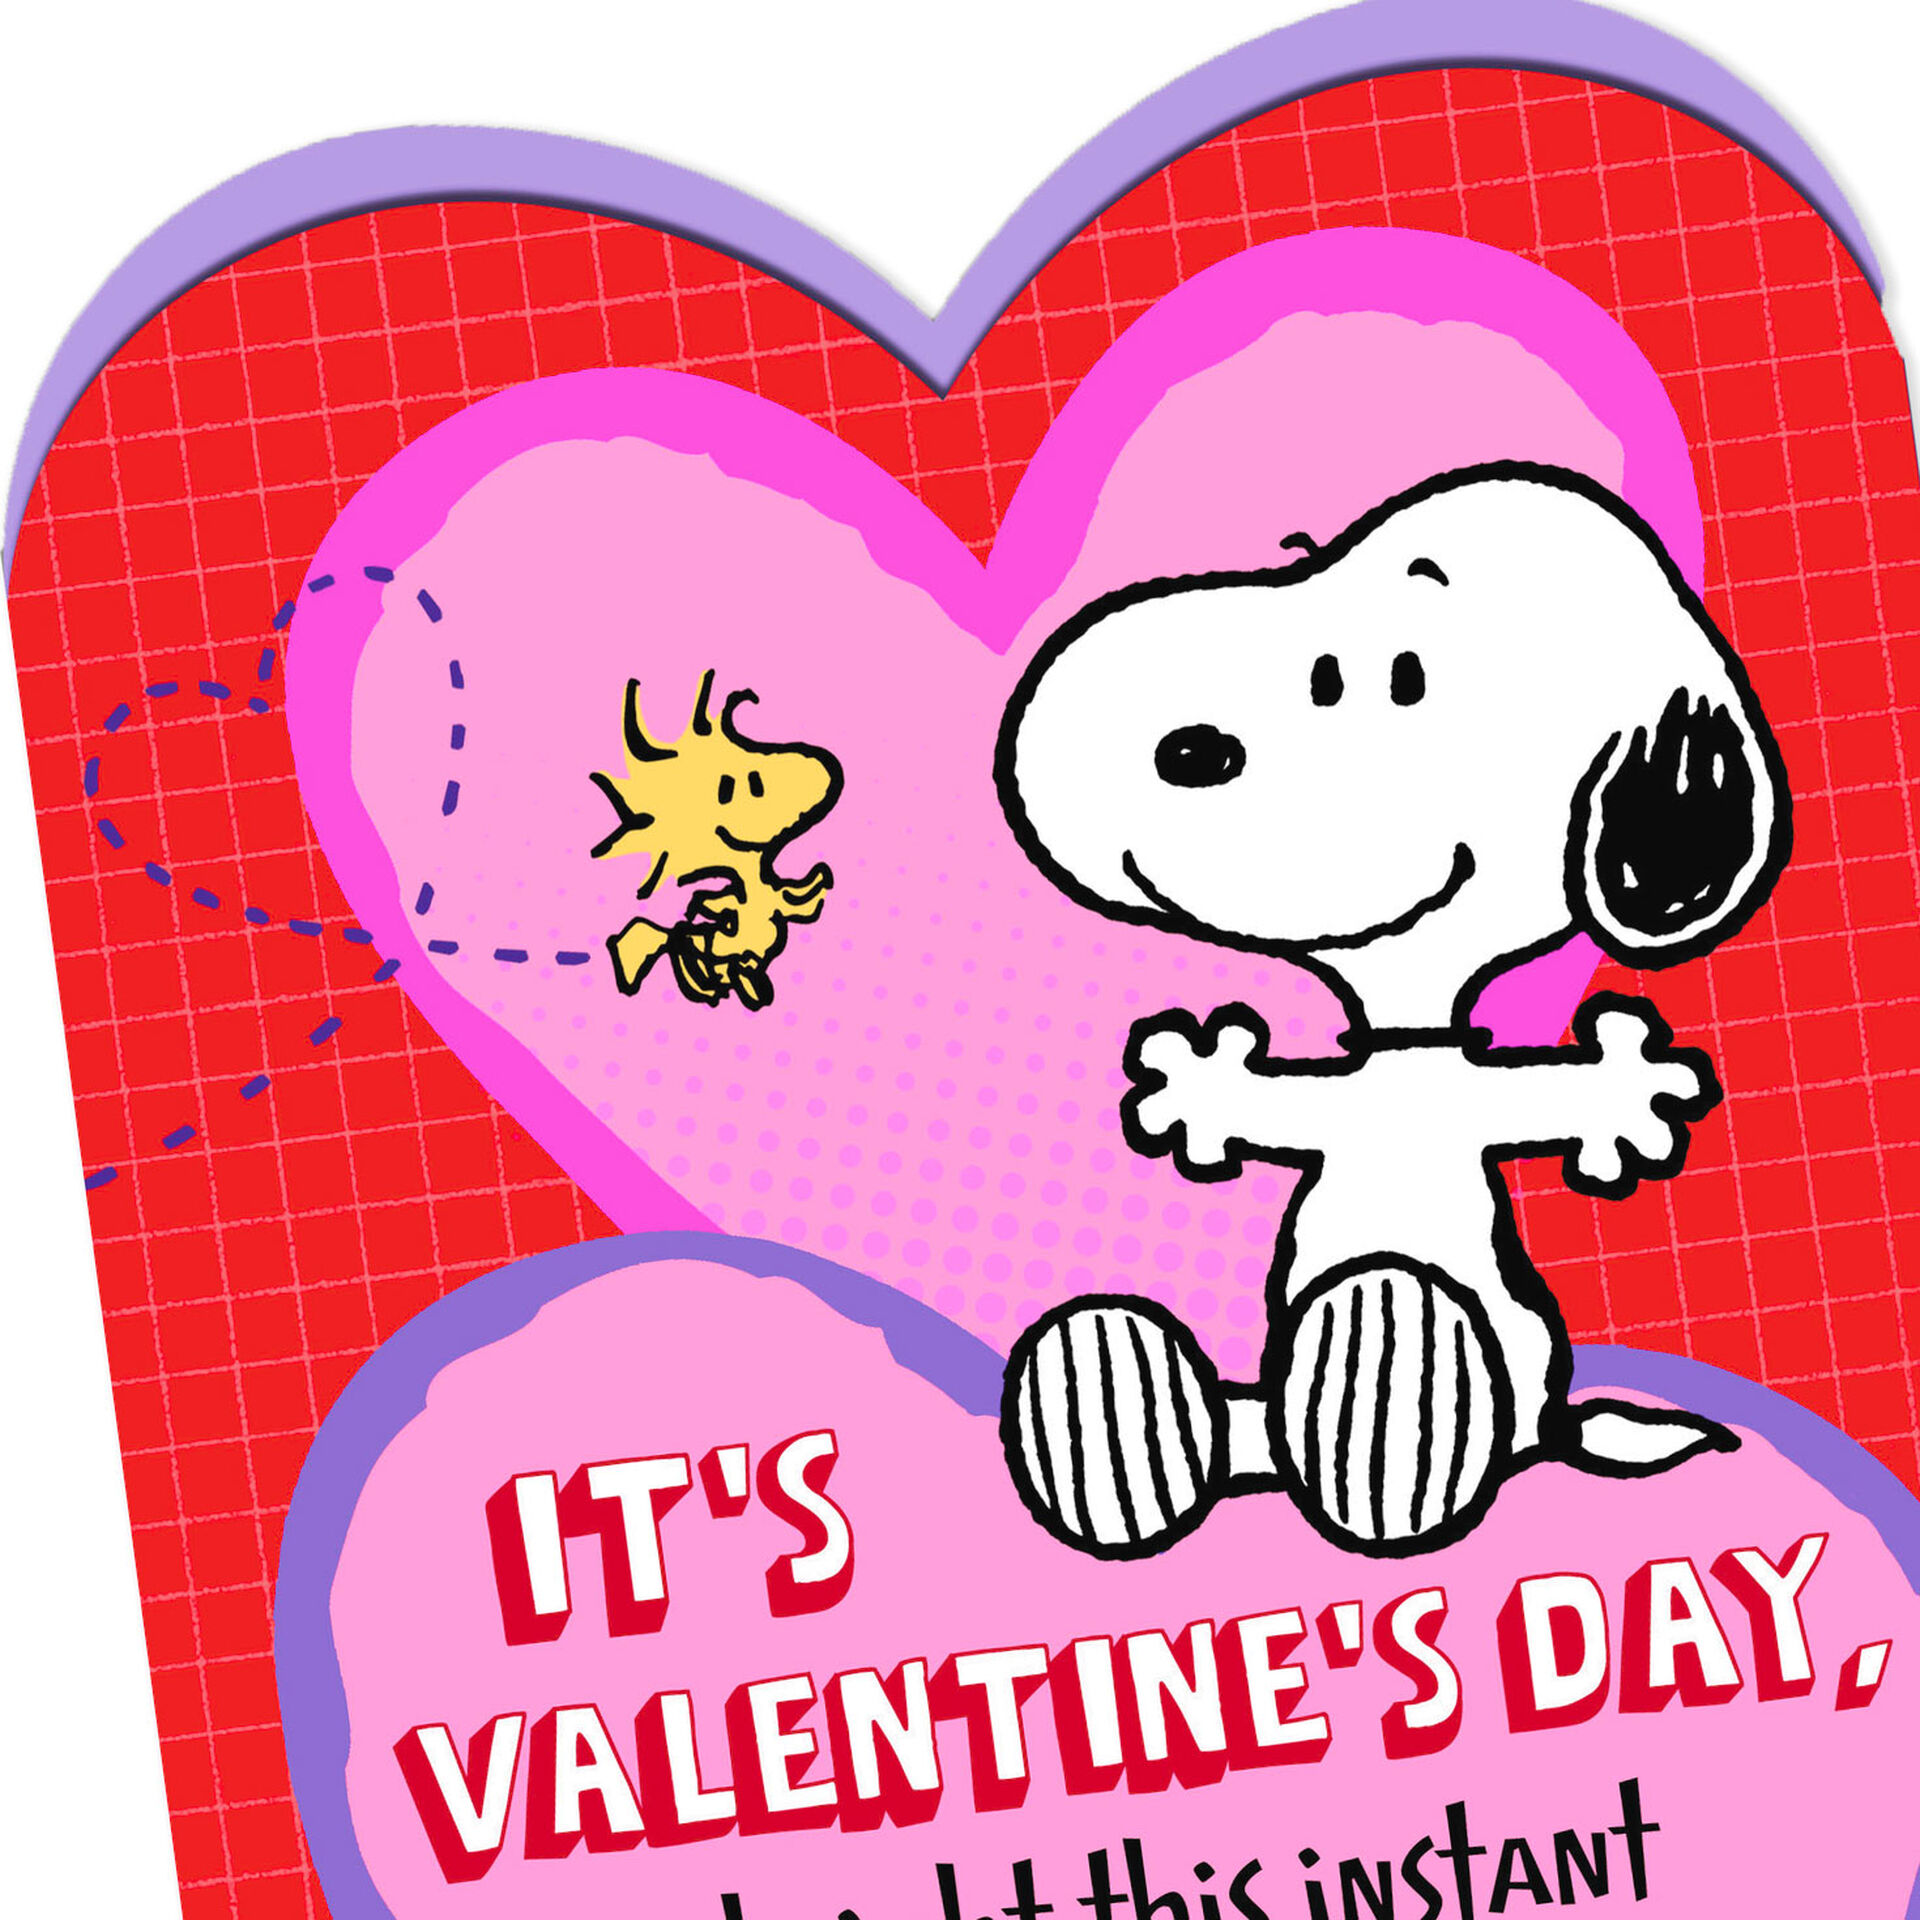 Peanuts® Snoopy Thinking of You Valentine's Day Card - Greeting Cards ...